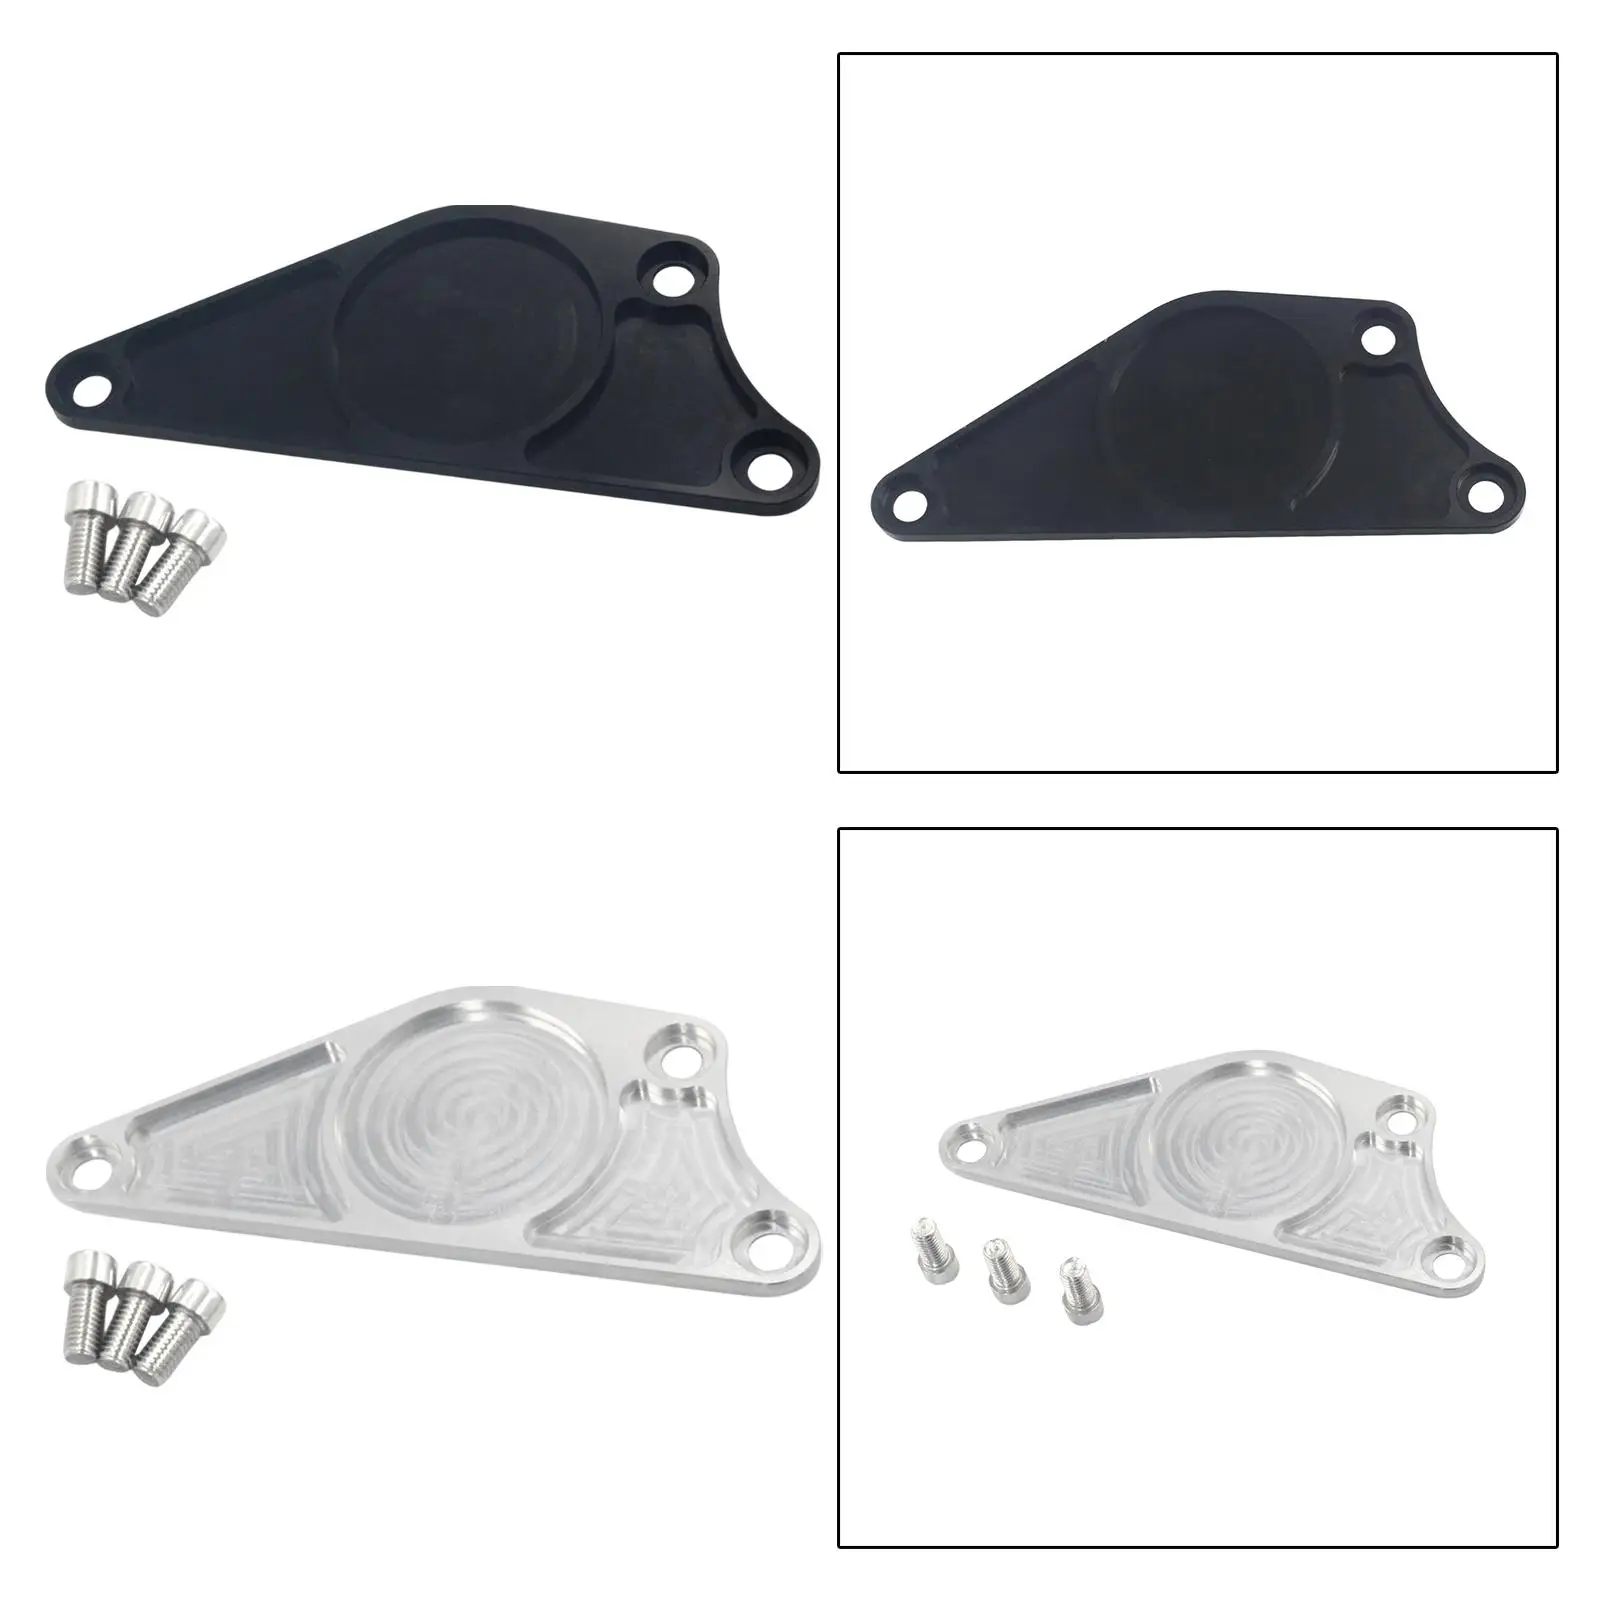 Camshaft Plate Aluminum Alloy Accessories Easy to Install Precision Works High Performance for Subaru BRZ Billet cam Plate